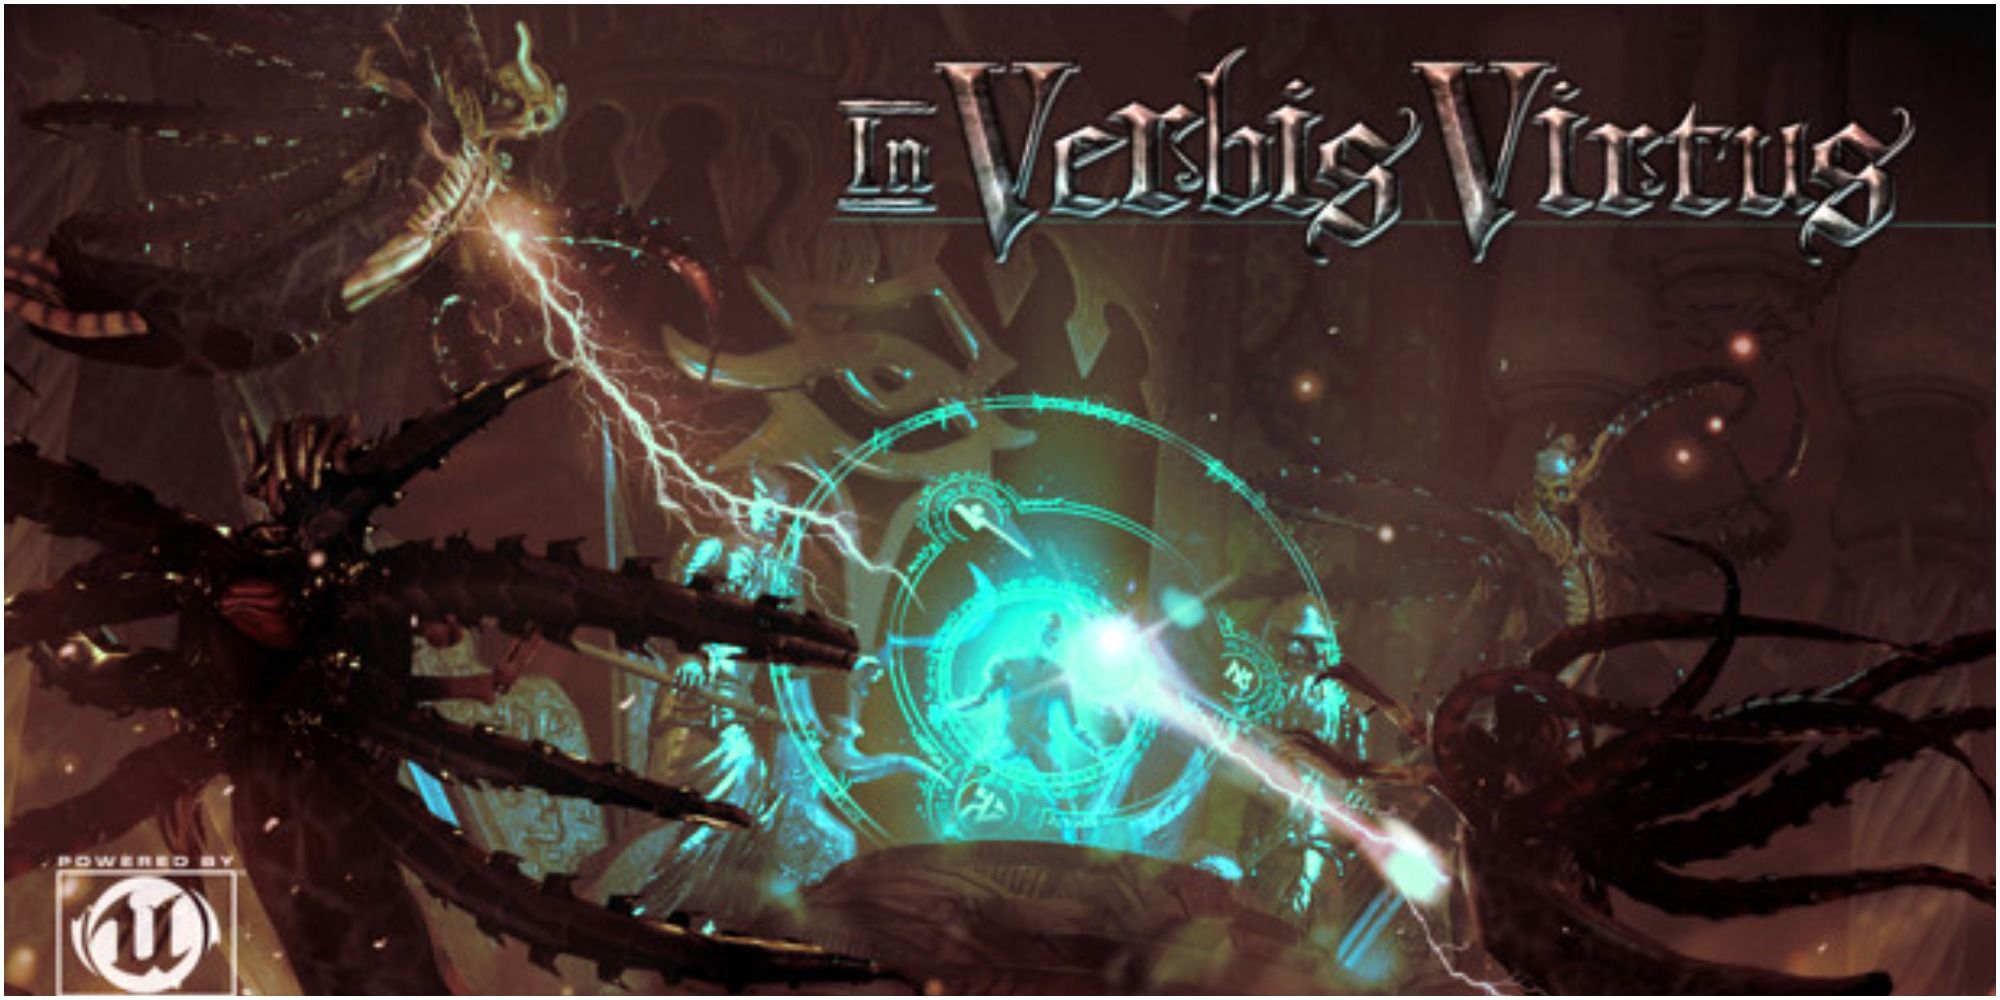 Sirens from In Verbis Virtus assaulting the Mage